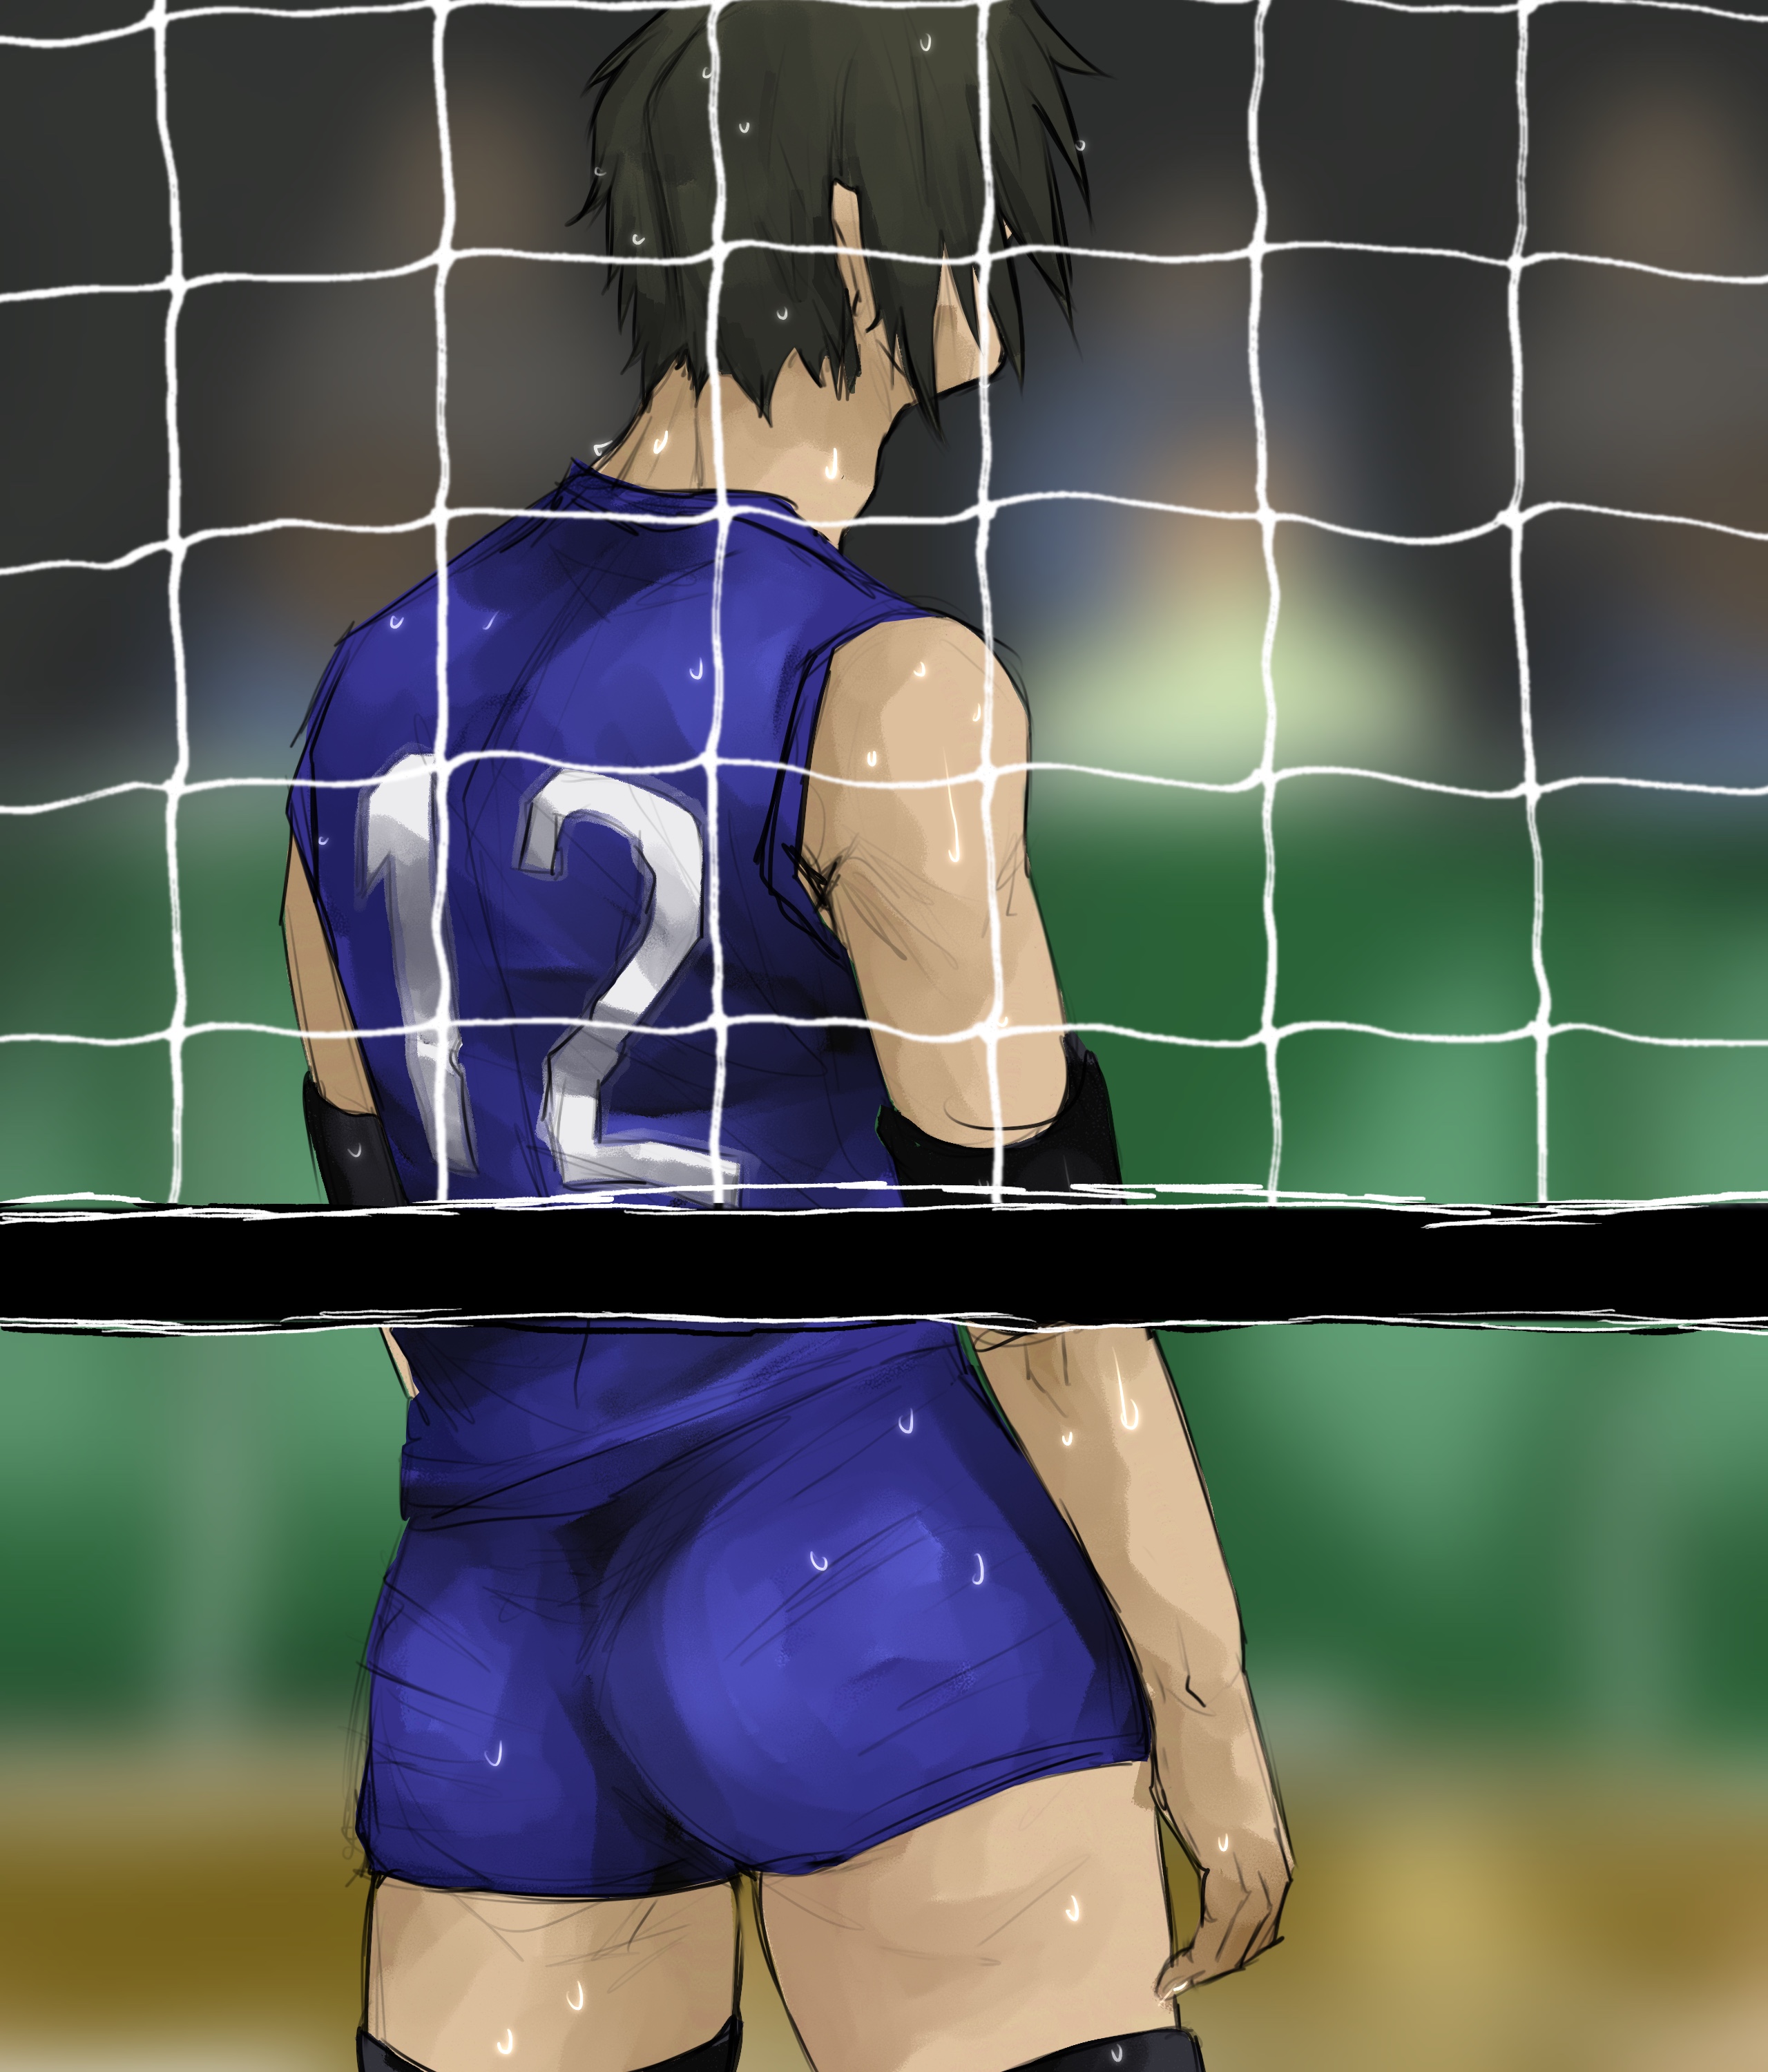 Illustration of player during Women’s Volleyball match. 